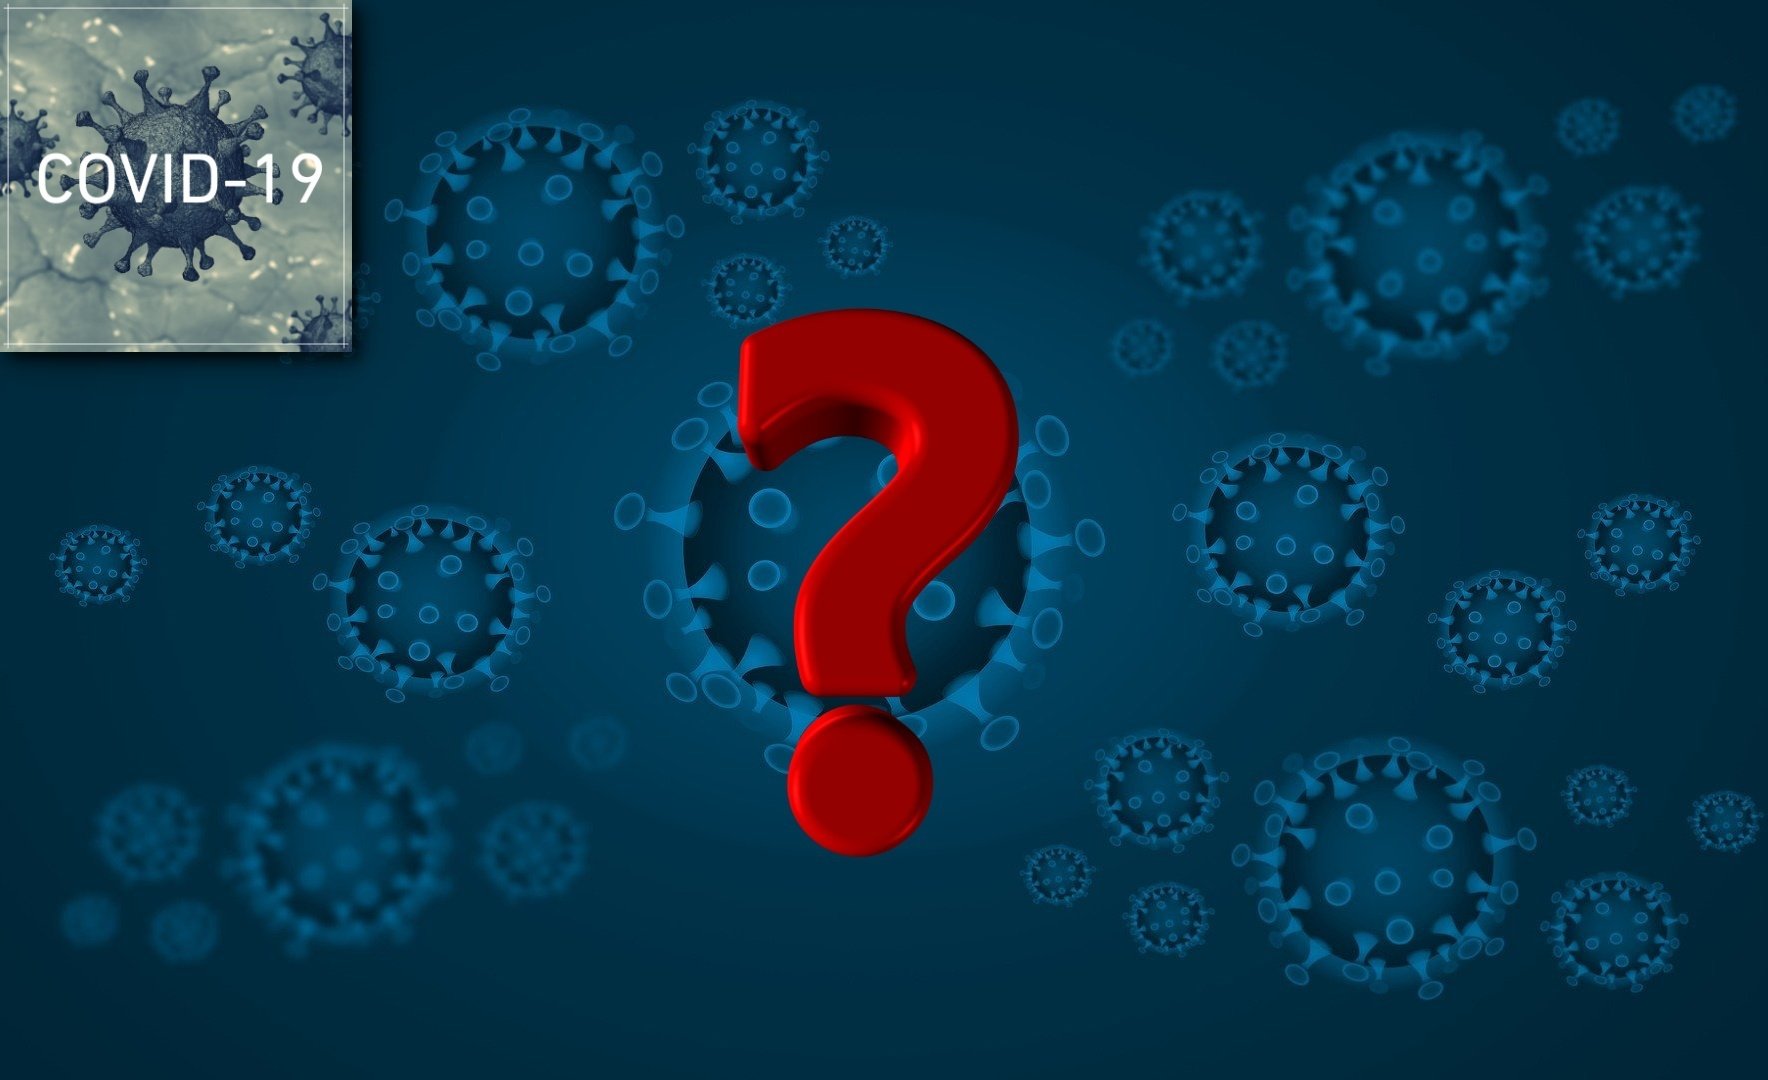 Coronavirus Disease Covid 19 Frequently Asked Questions